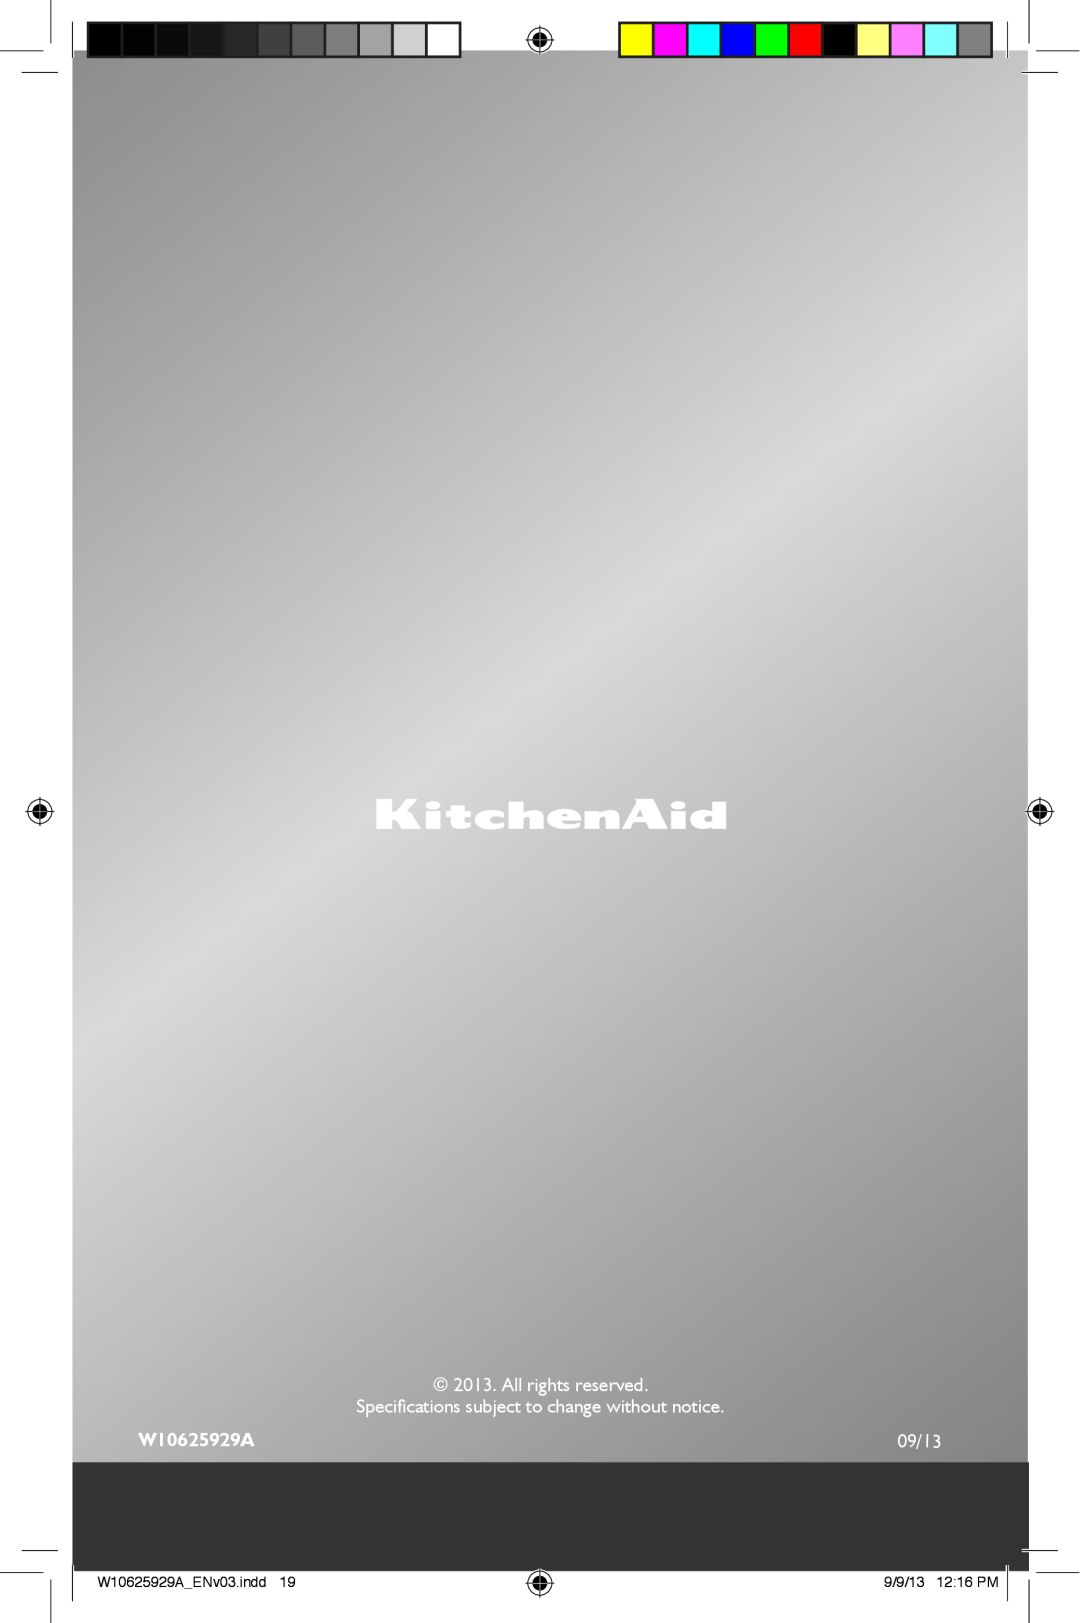 KitchenAid 5KMT421, 5KMT221 manual All rights reserved, Specifications subject to change without notice, W10625929A, 09/13 